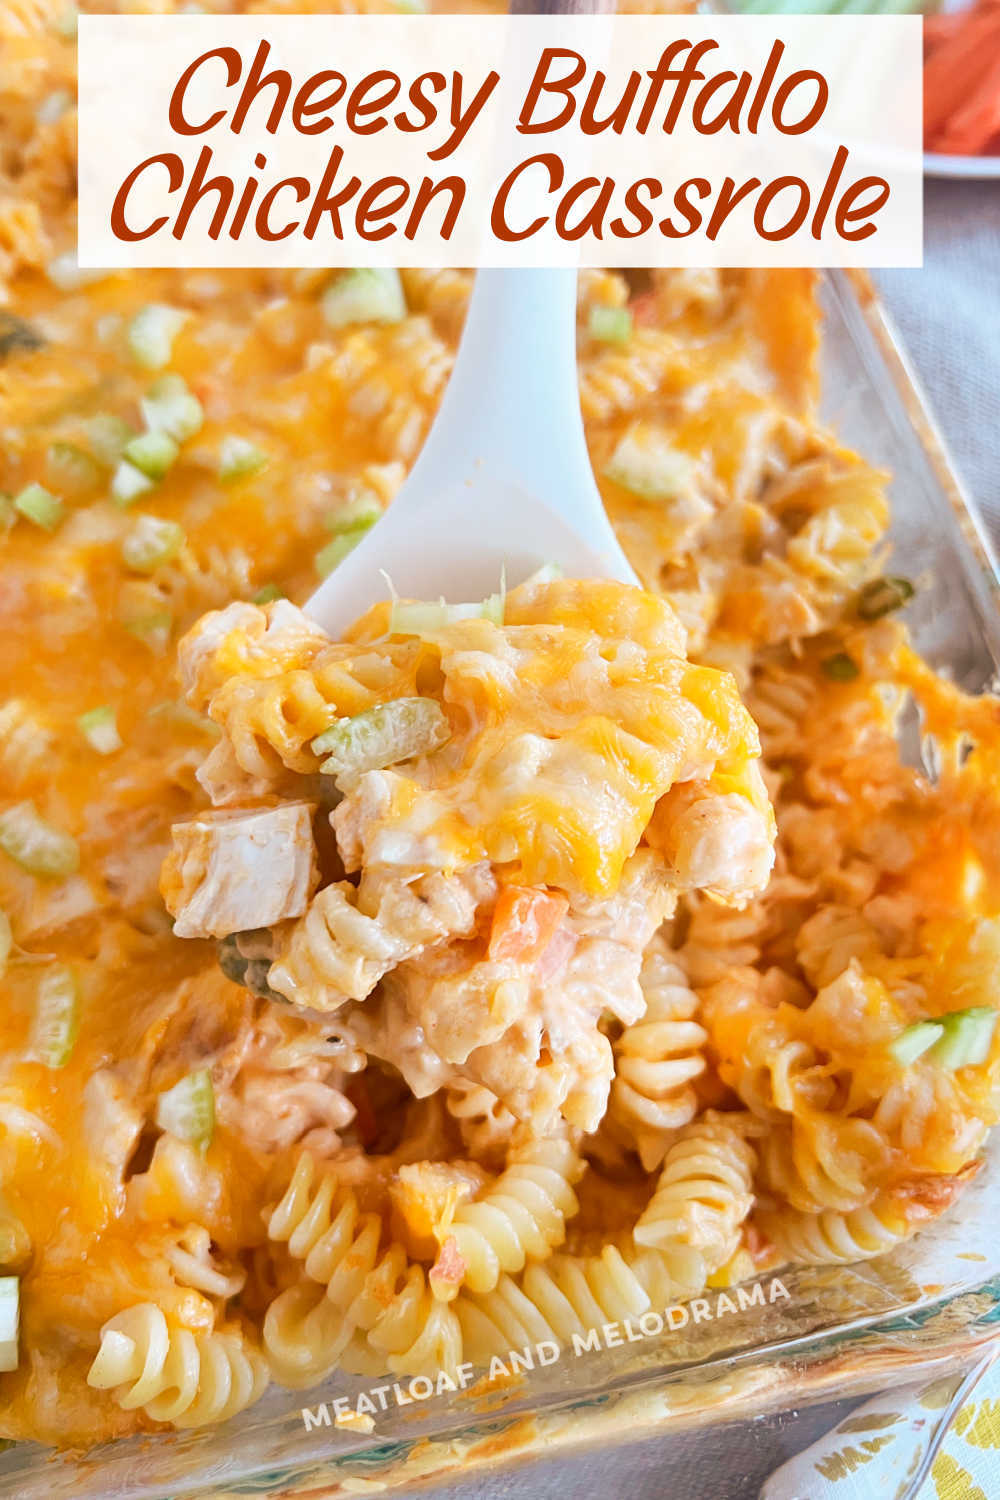 This Easy Buffalo Chicken Casserole recipe combines cooked chicken with pasta and frozen vegetables baked in a creamy cheesy sauce. An easy dinner recipe the whole family loves! via @meamel